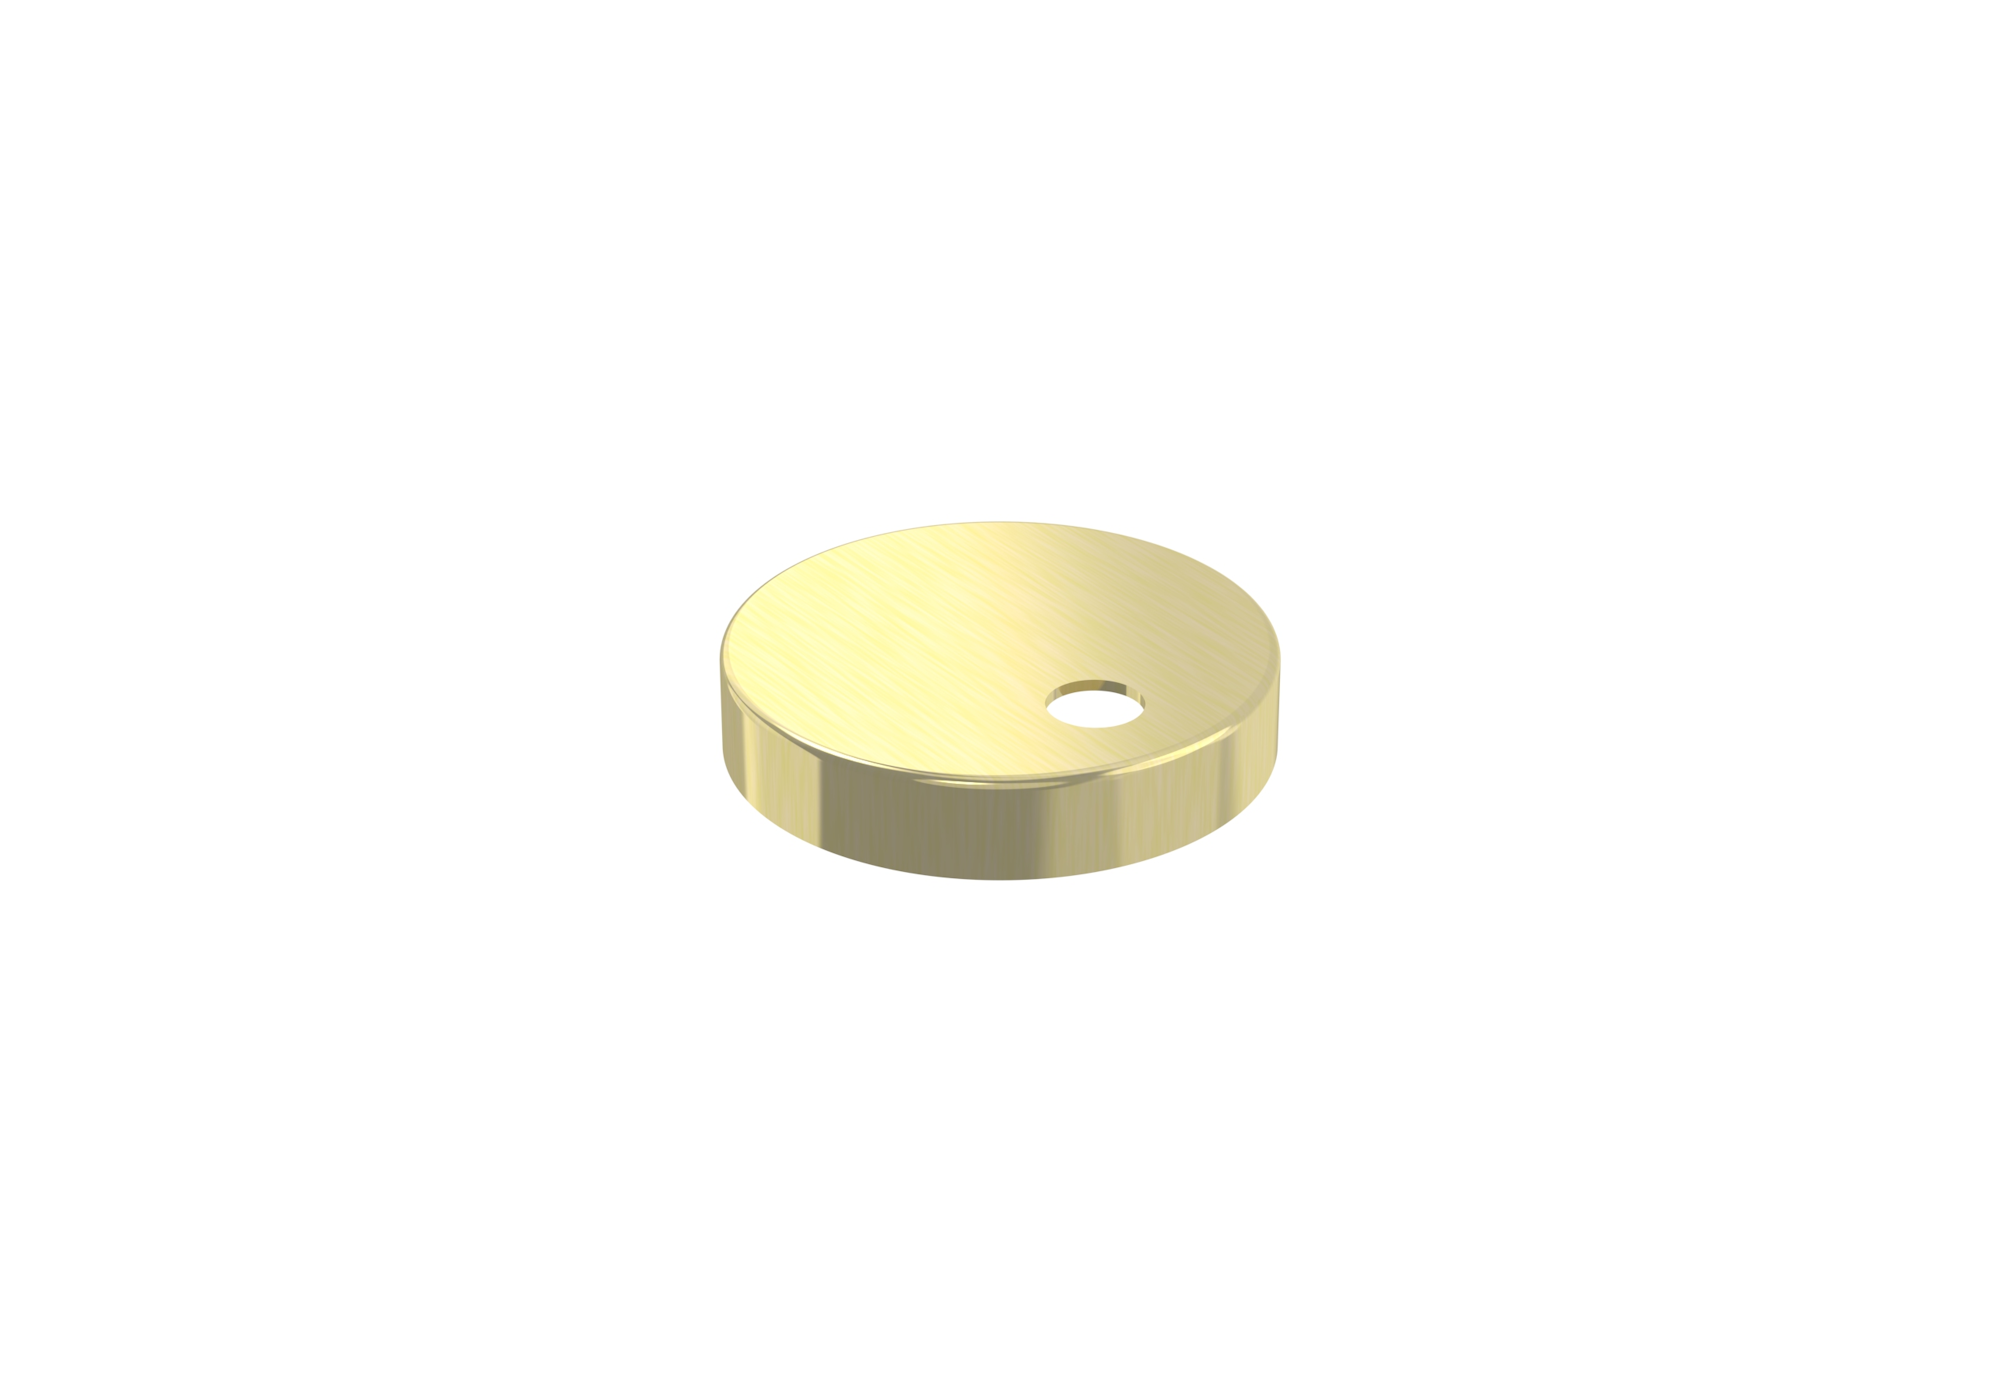 Toilet seat hinge cover - Brushed Brass - For MATS01